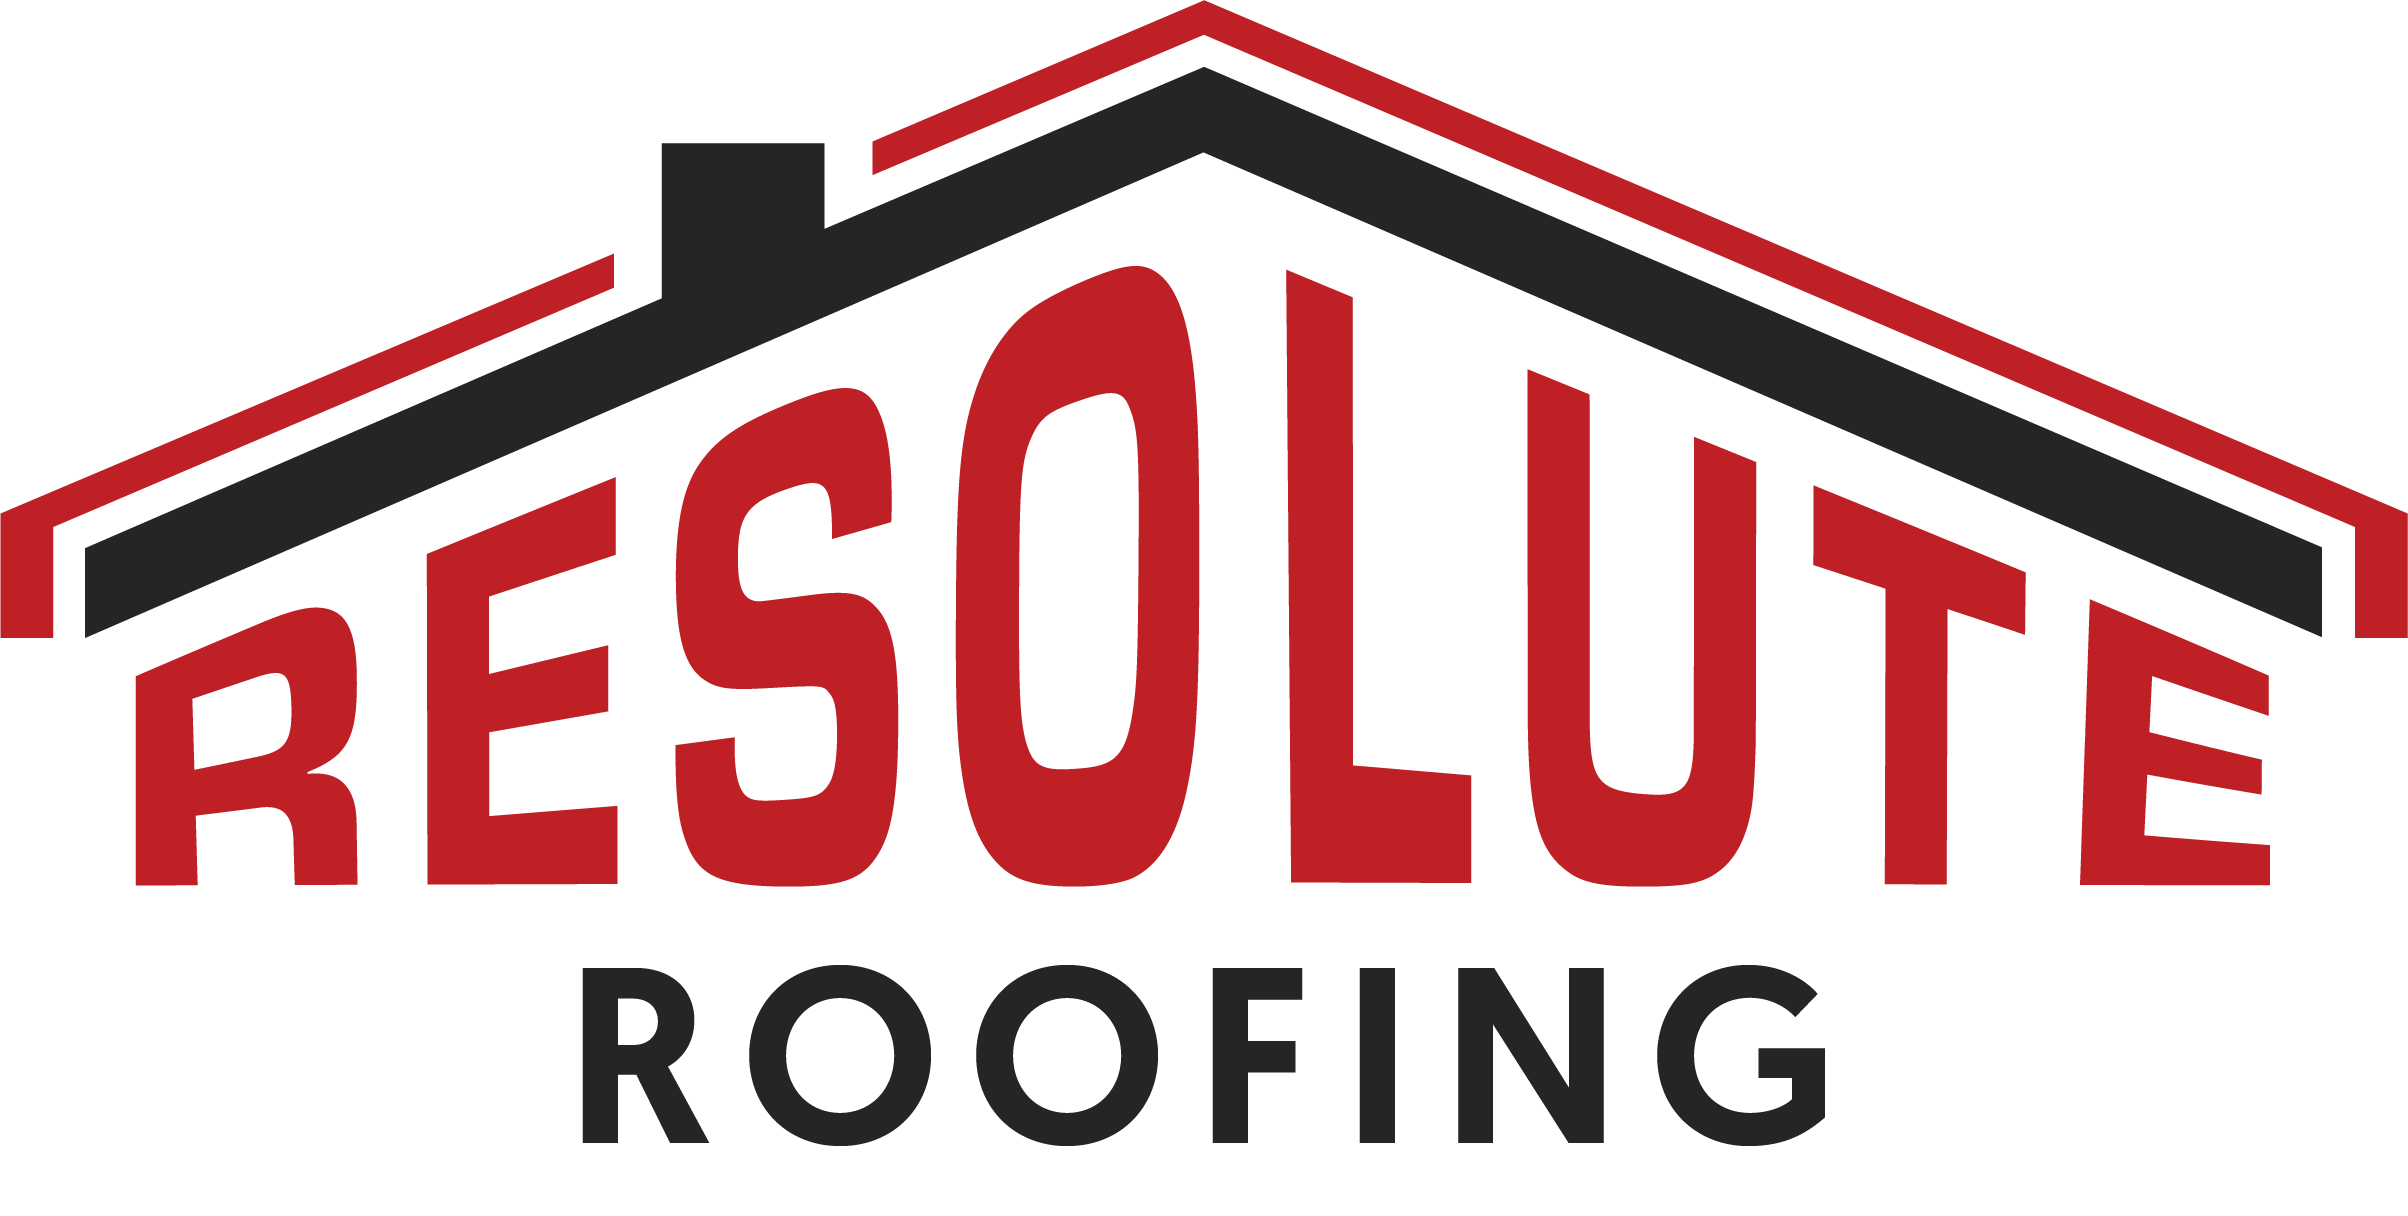 Resolute Roofing (Red & Gray)